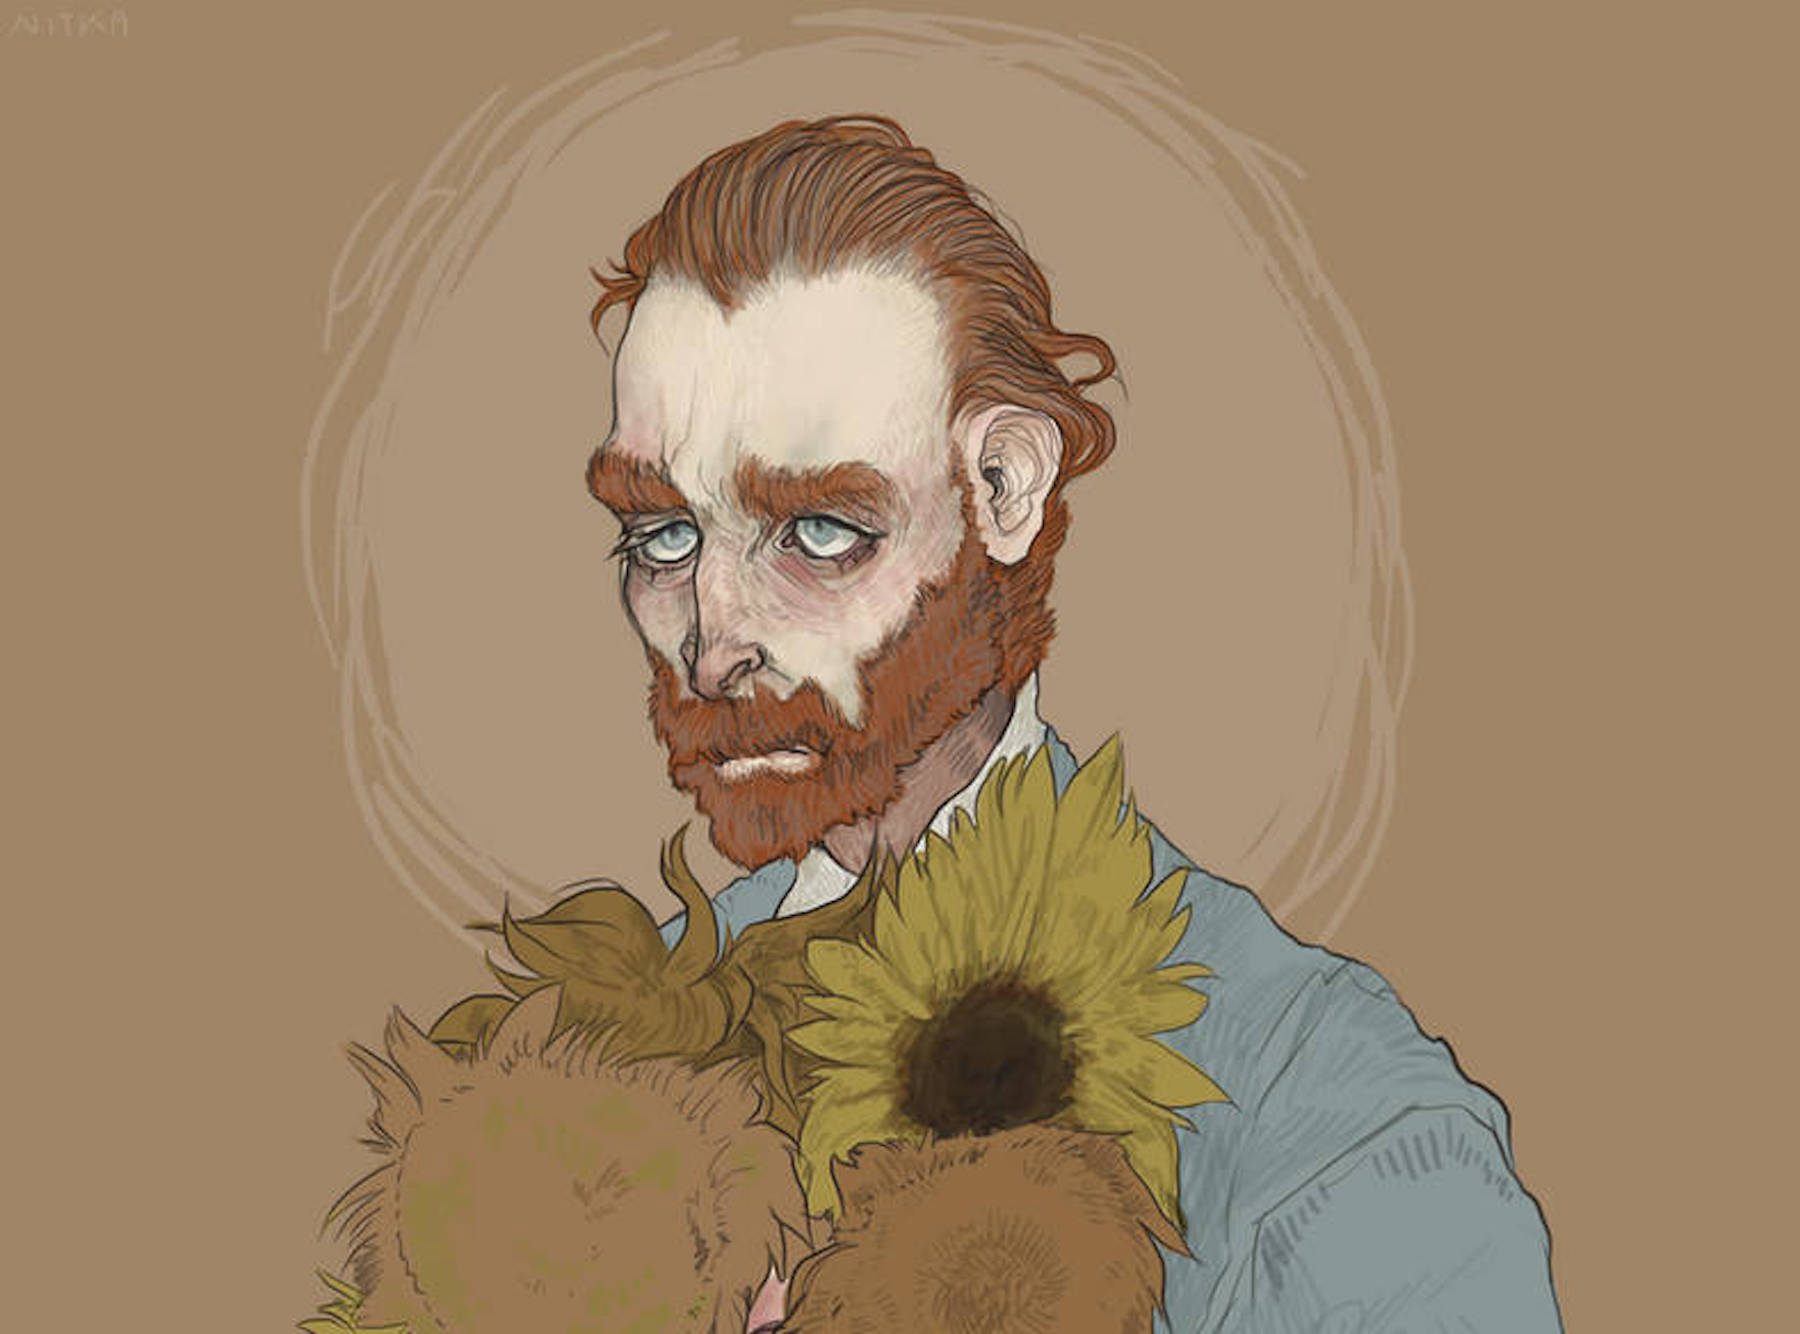 Vincent van Gogh holding sunflowers and appearing melancholic against a simple brown background, cartoon-style portrait.